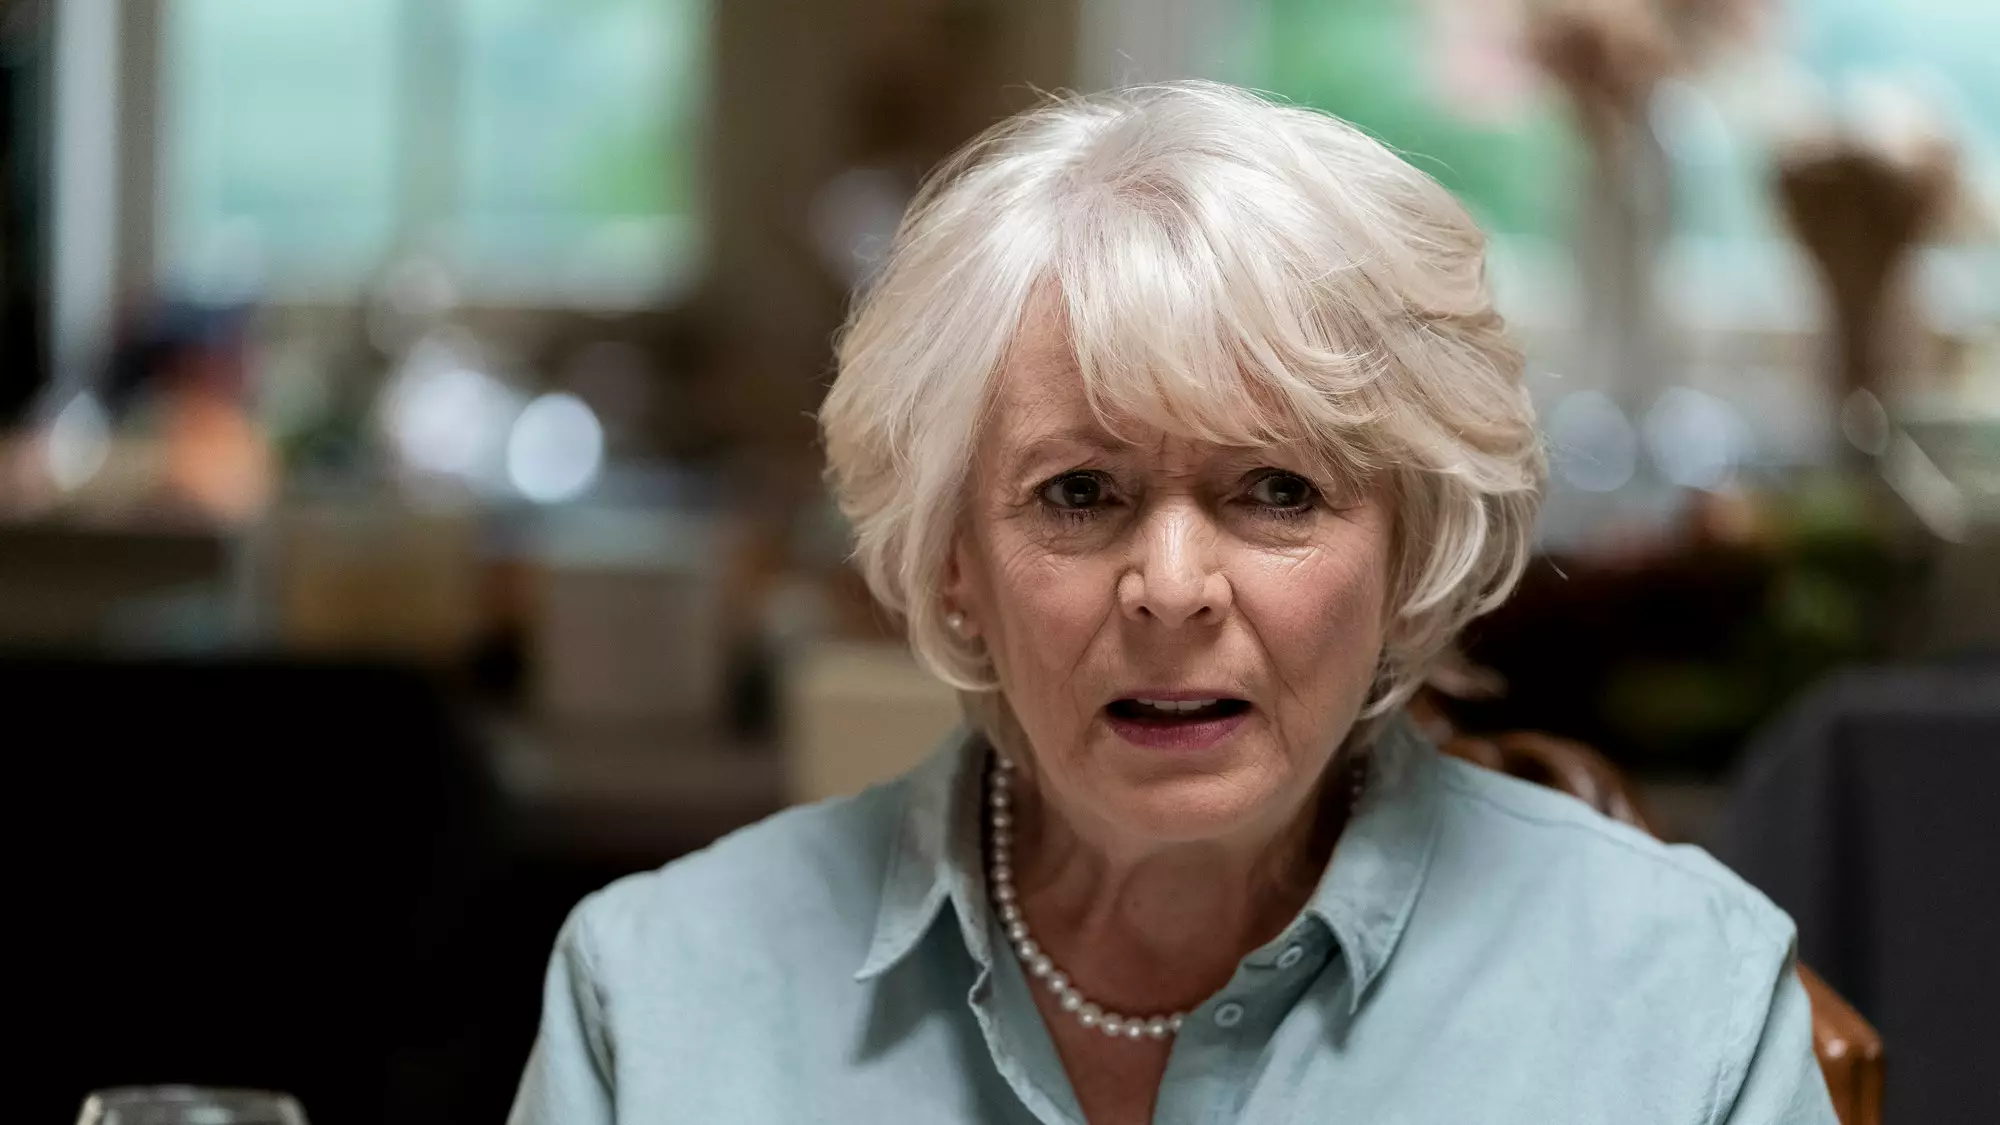 BBC’s New ‘Dr Foster’ Spin-Off ‘Life’ Starring Alison Steadman Starts On Tuesday